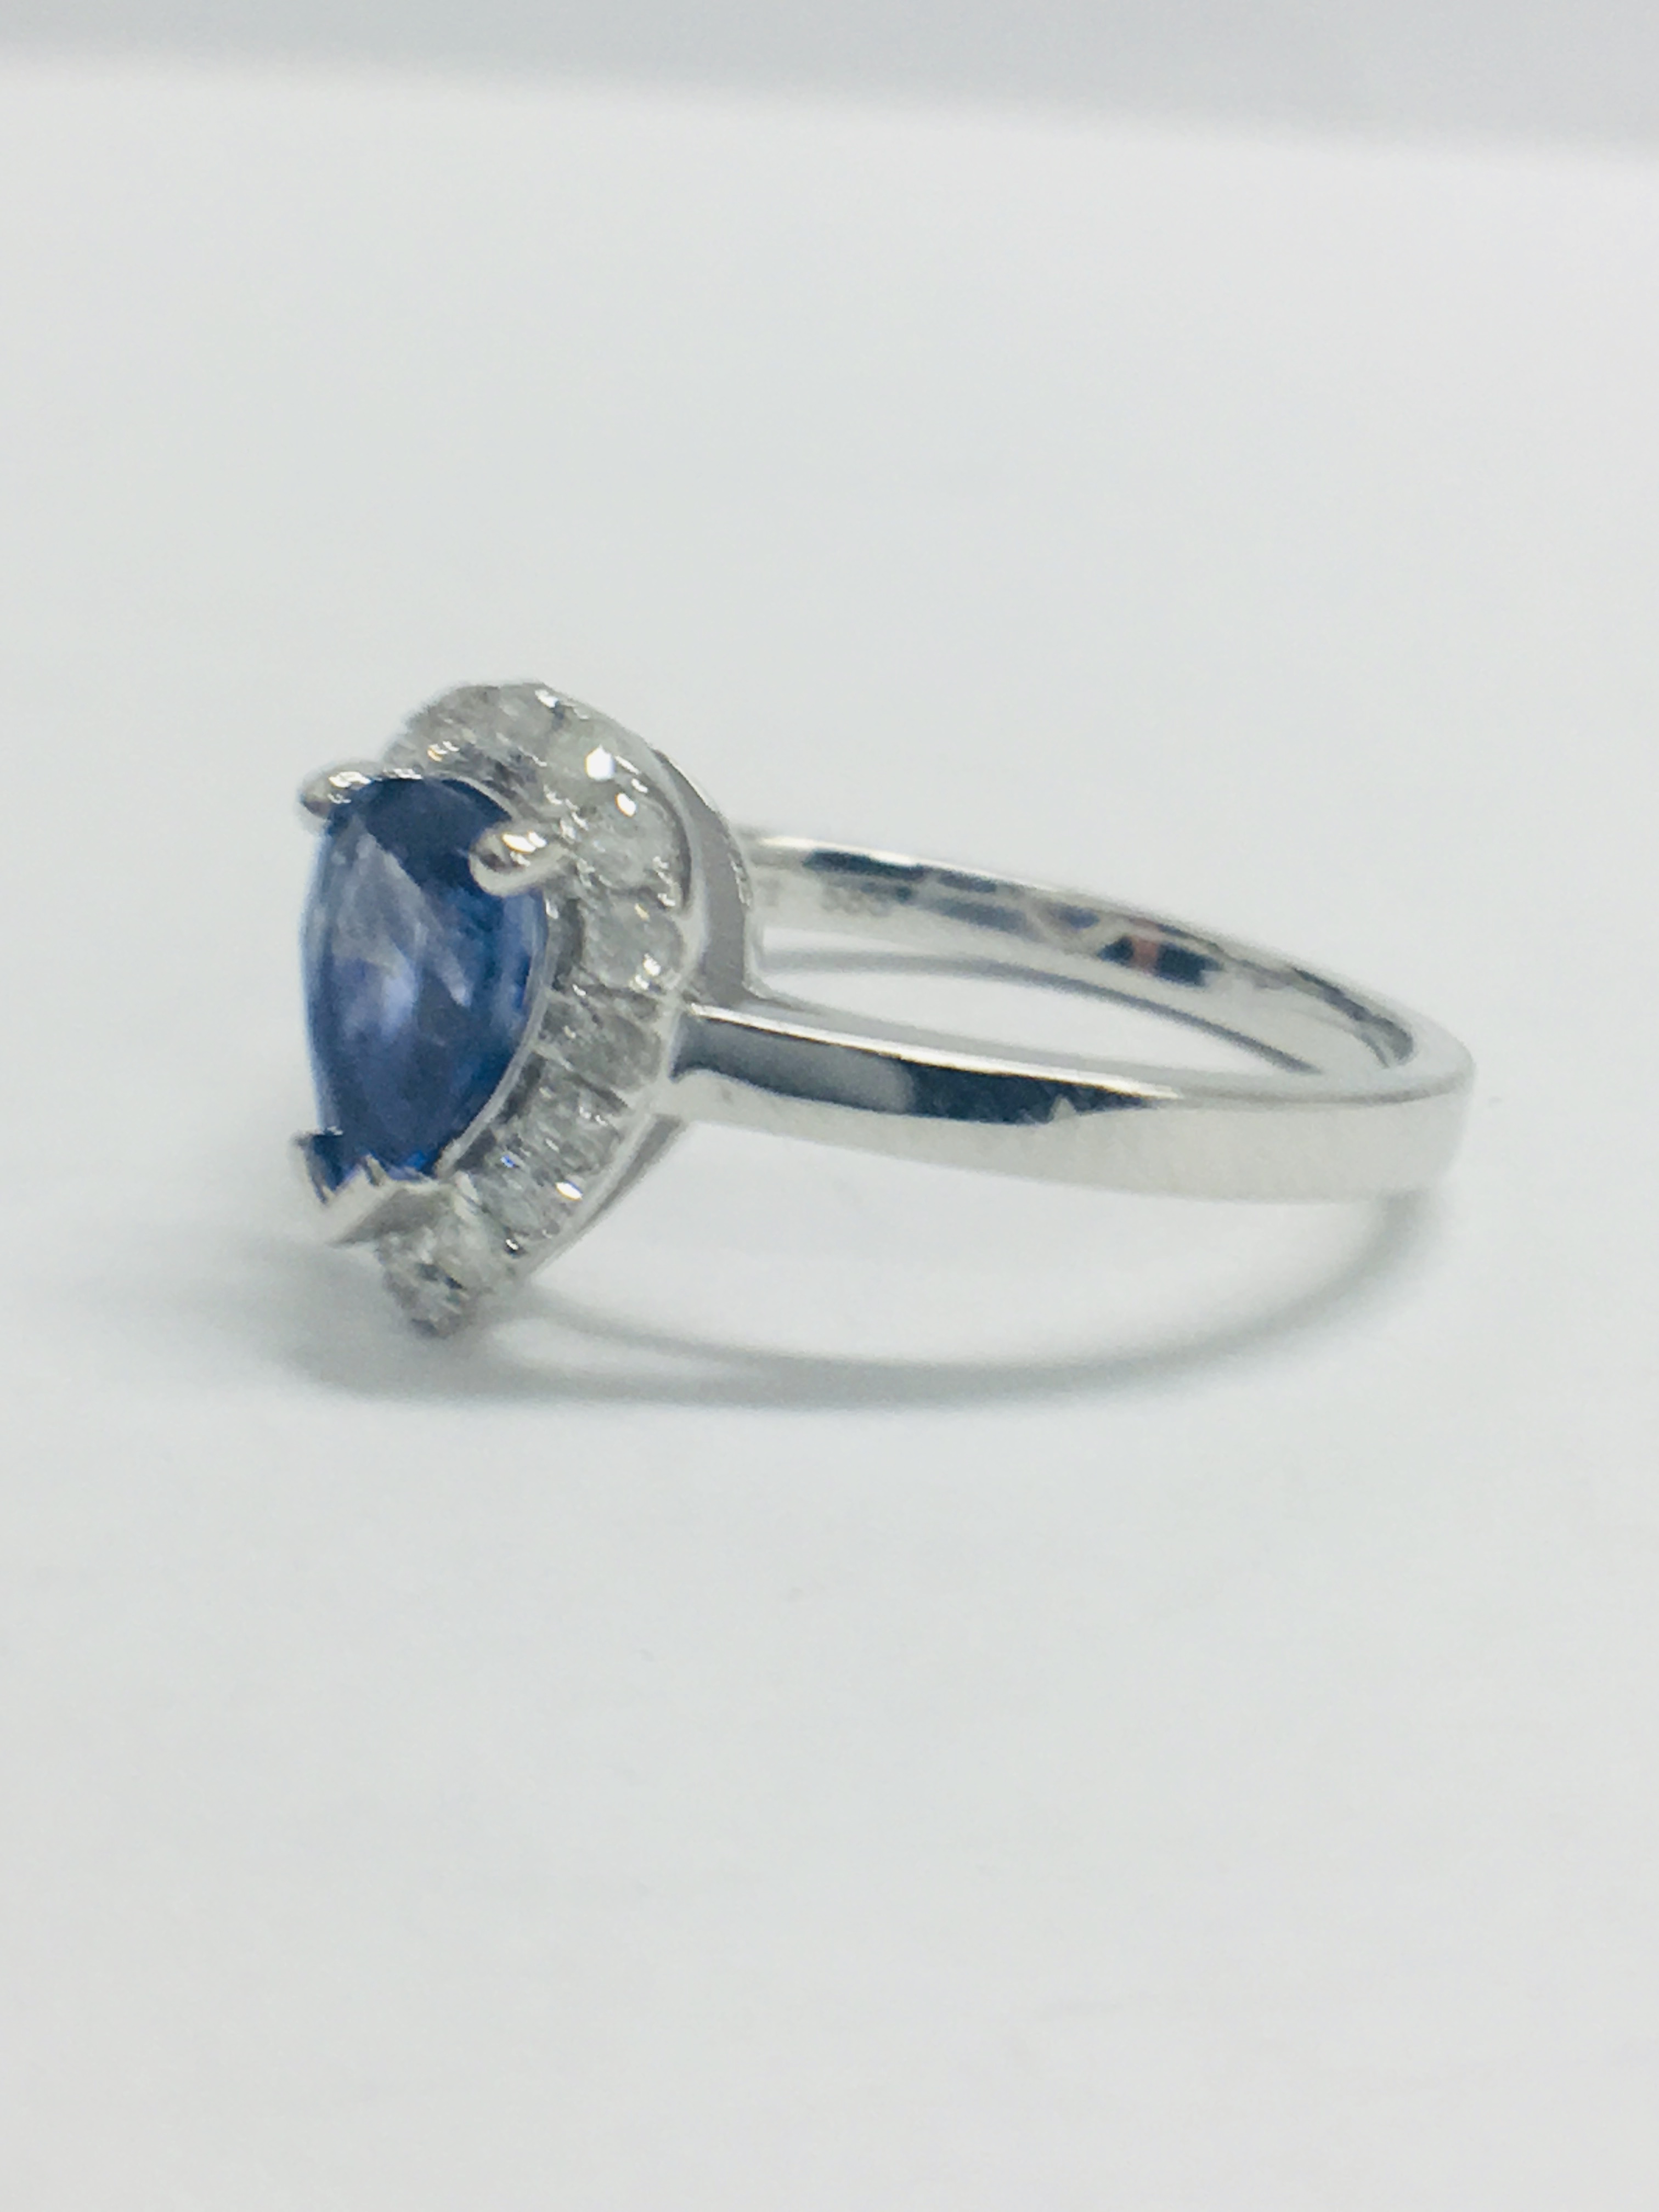 14Ct White Gold Sapphire And Diamond Ring. - Image 2 of 10